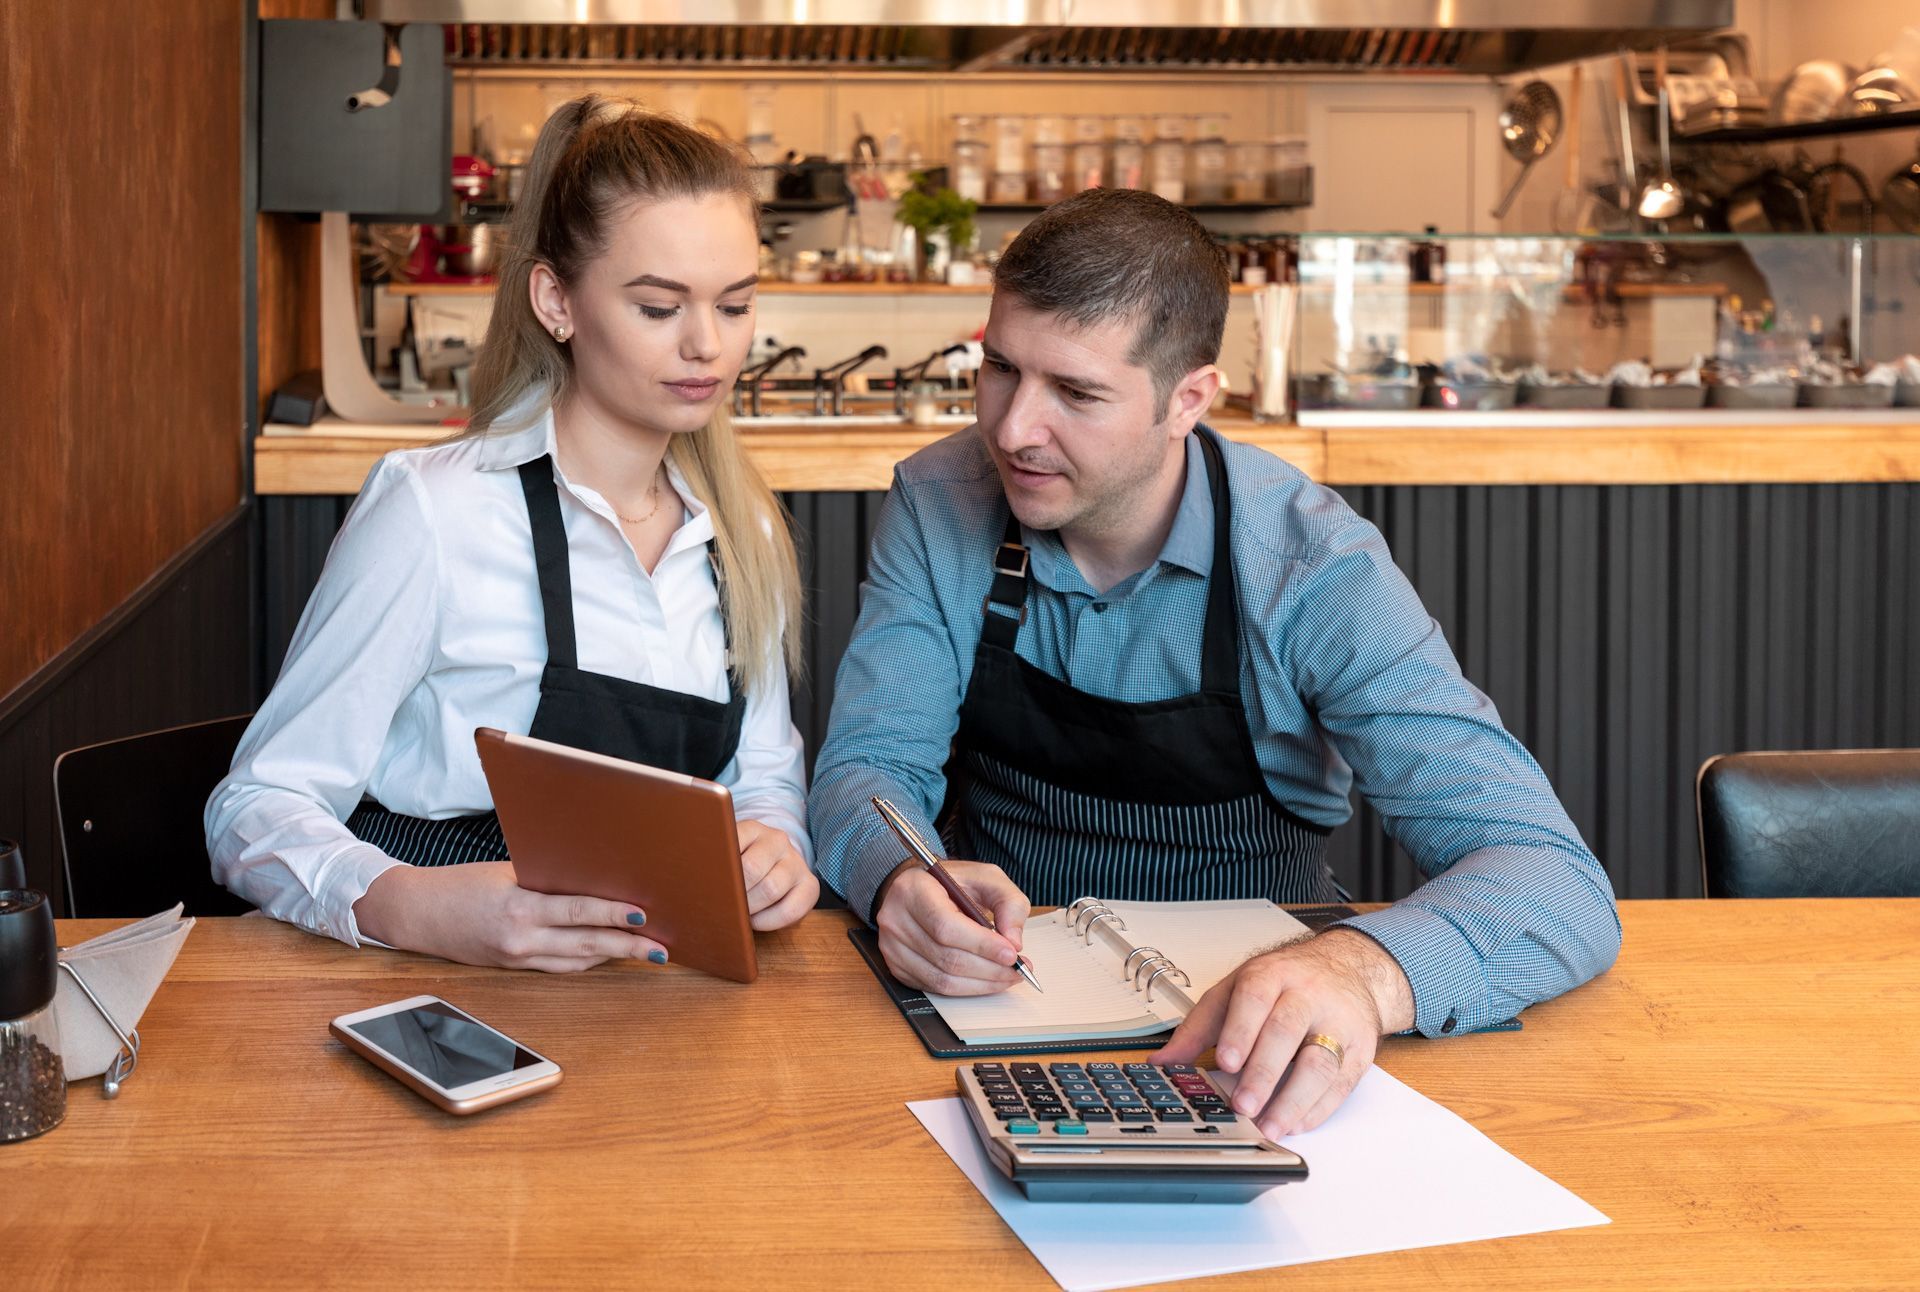 A man and a woman are sitting at a table in a restaurant looking at a tablet and a calculator